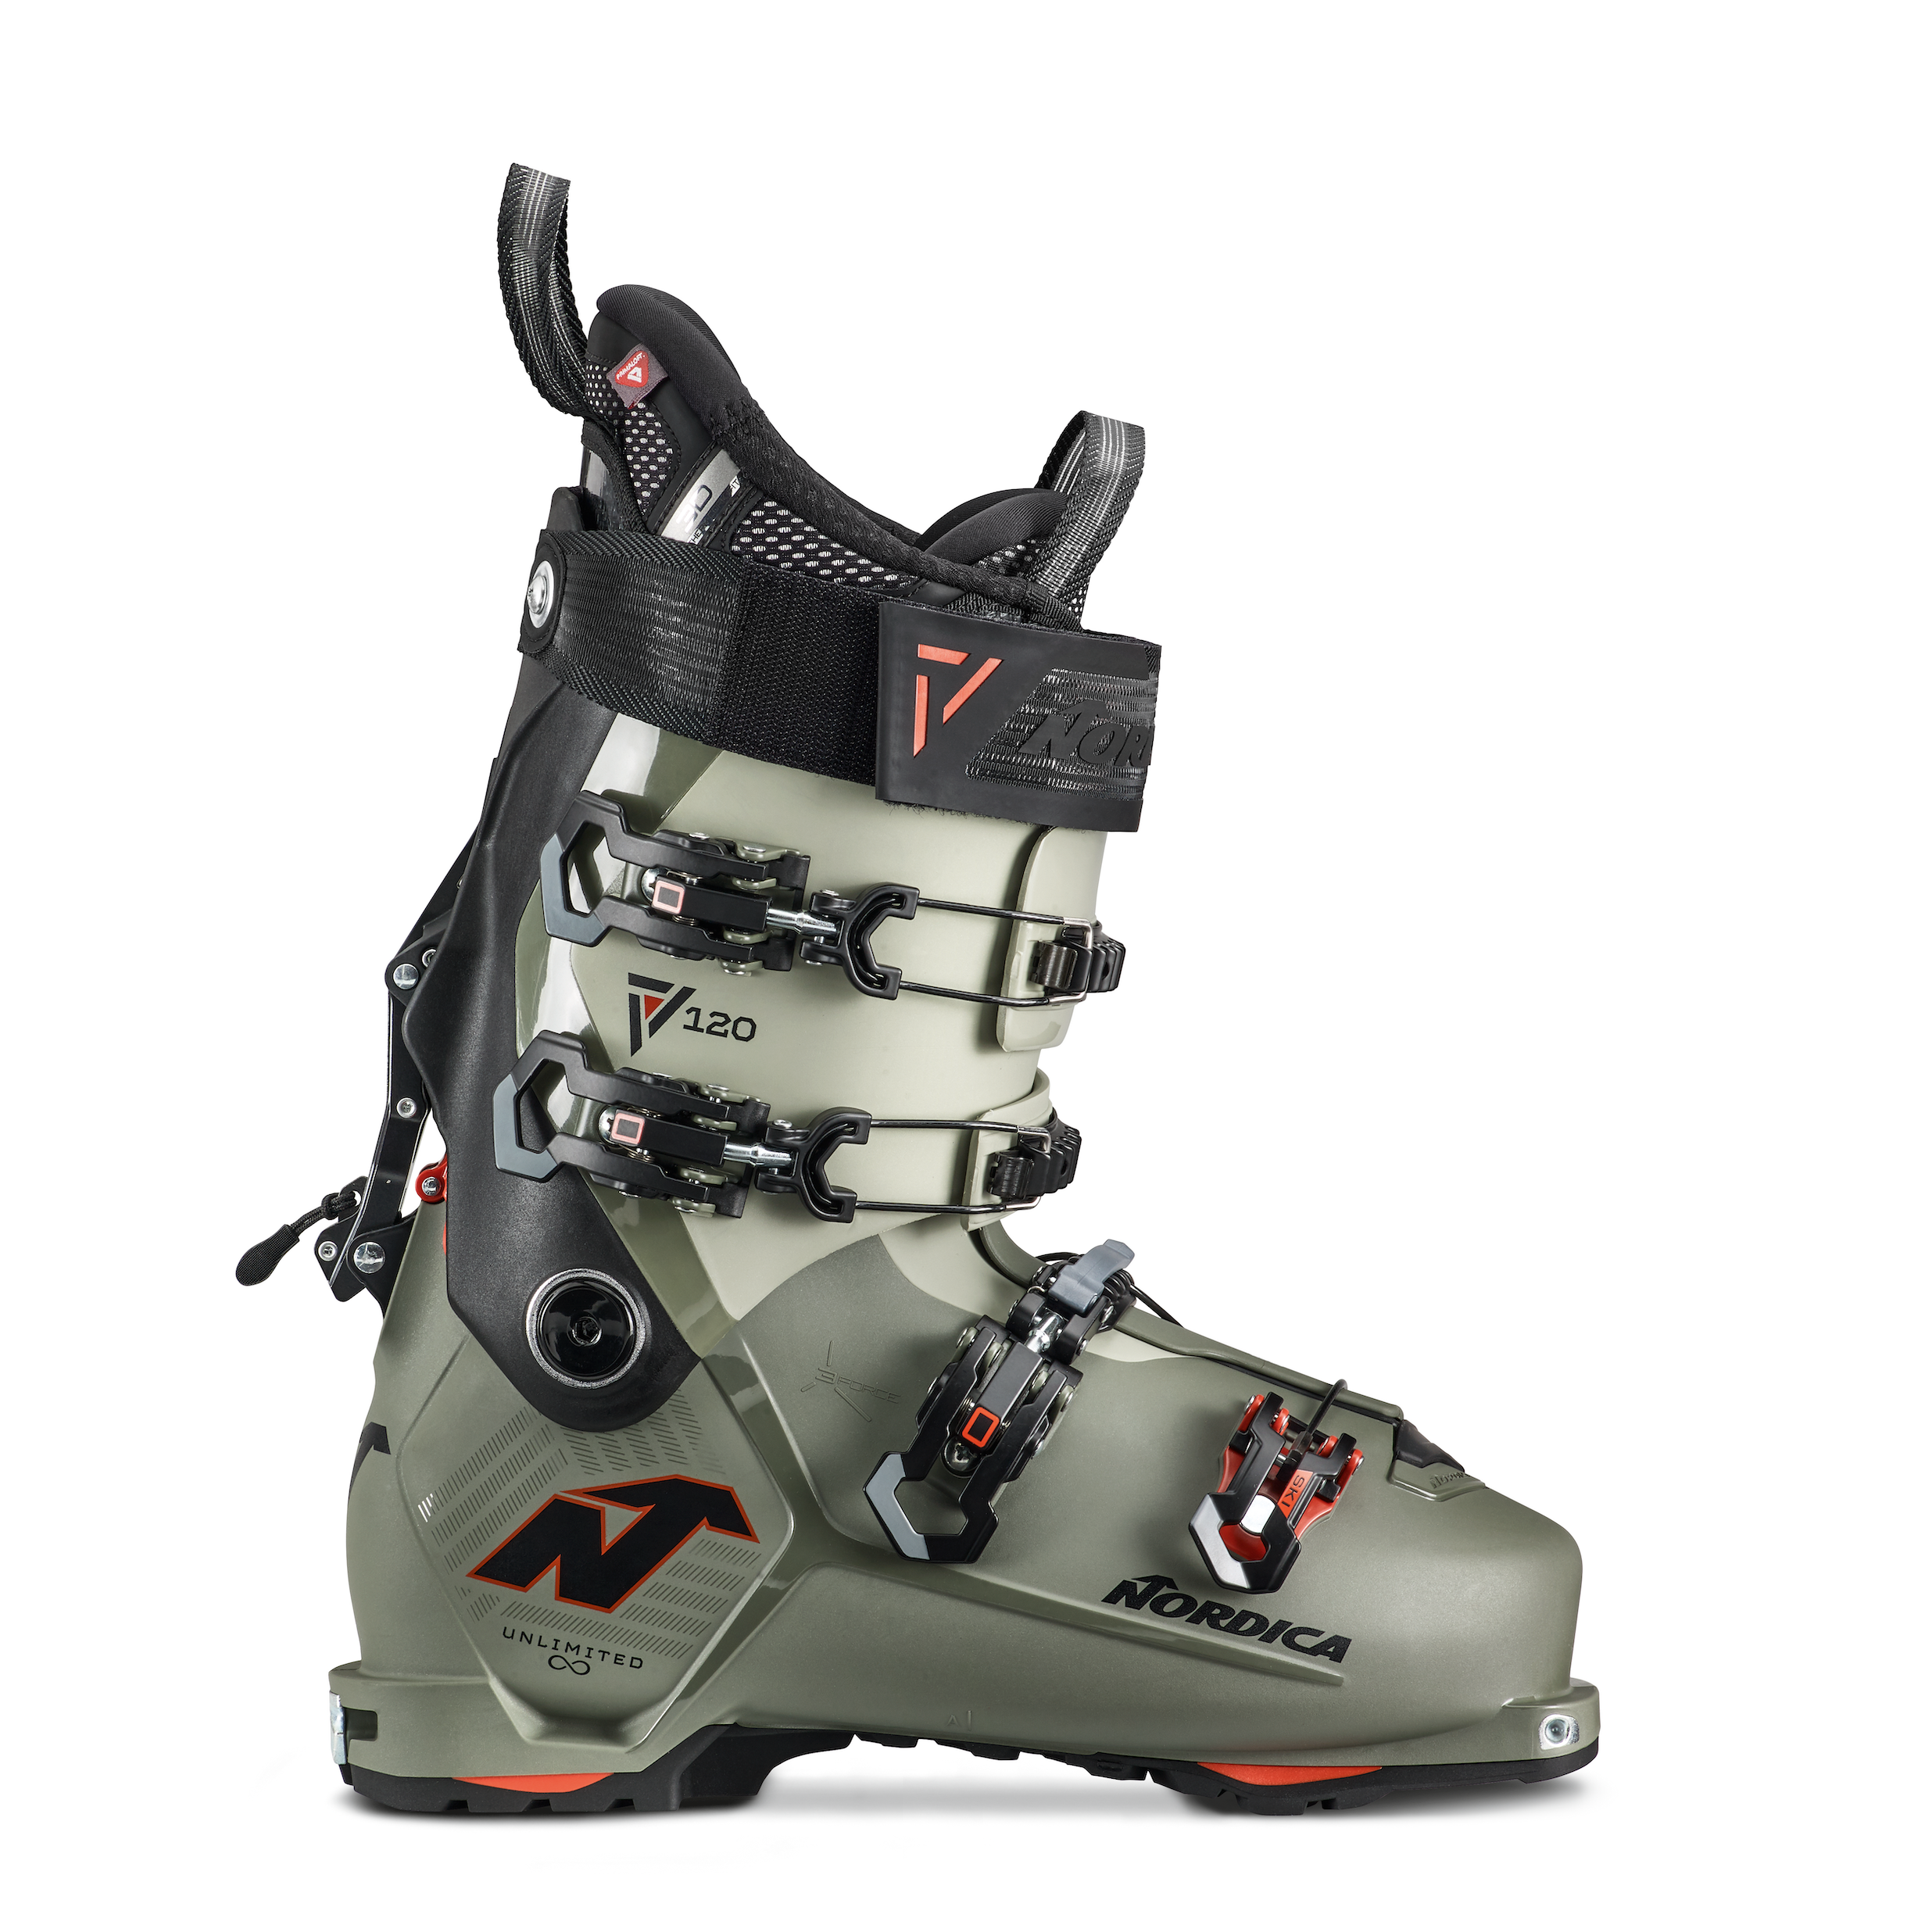 Men's Nordica Unlimited 120 DYN alpine touring ski boot in green, black and red with 4 buckles.